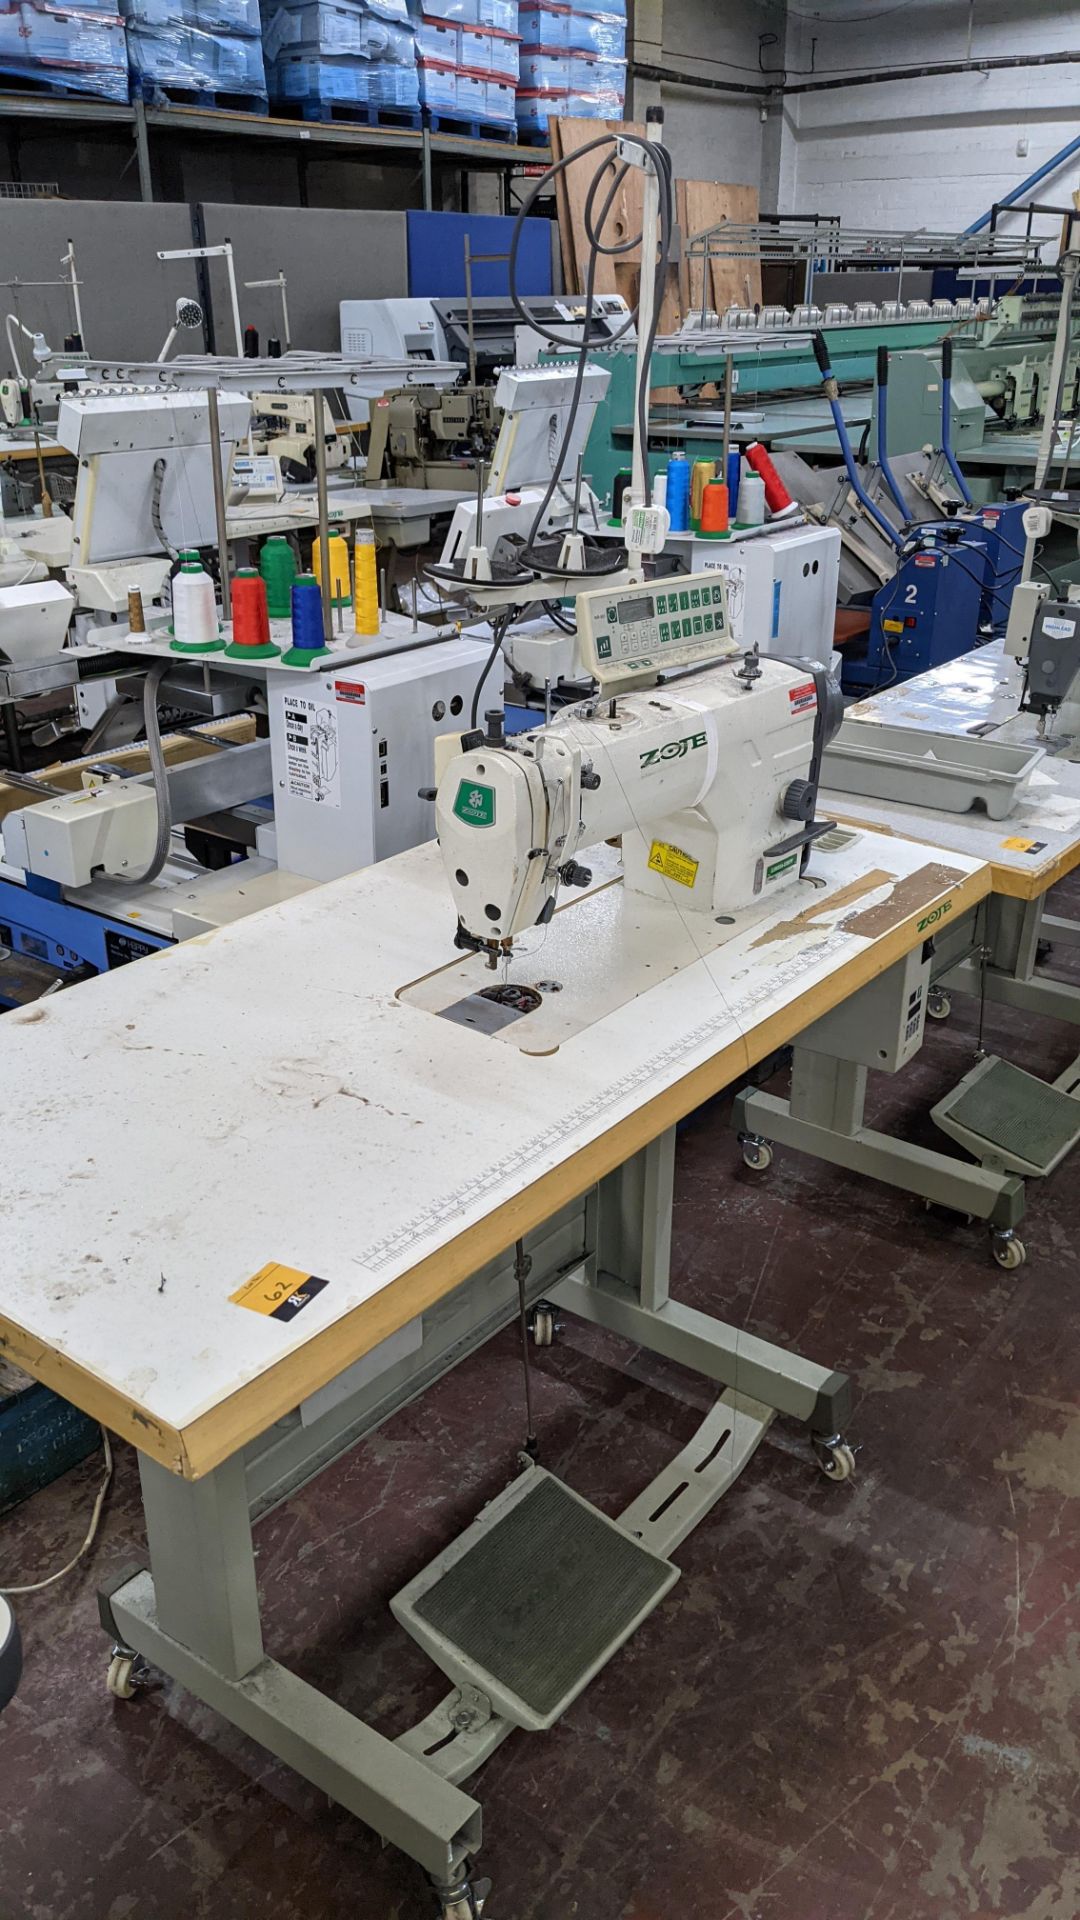 Zoje model ZJ9800A-D3B/PF sewing machine with WR-501 controller - Image 16 of 16